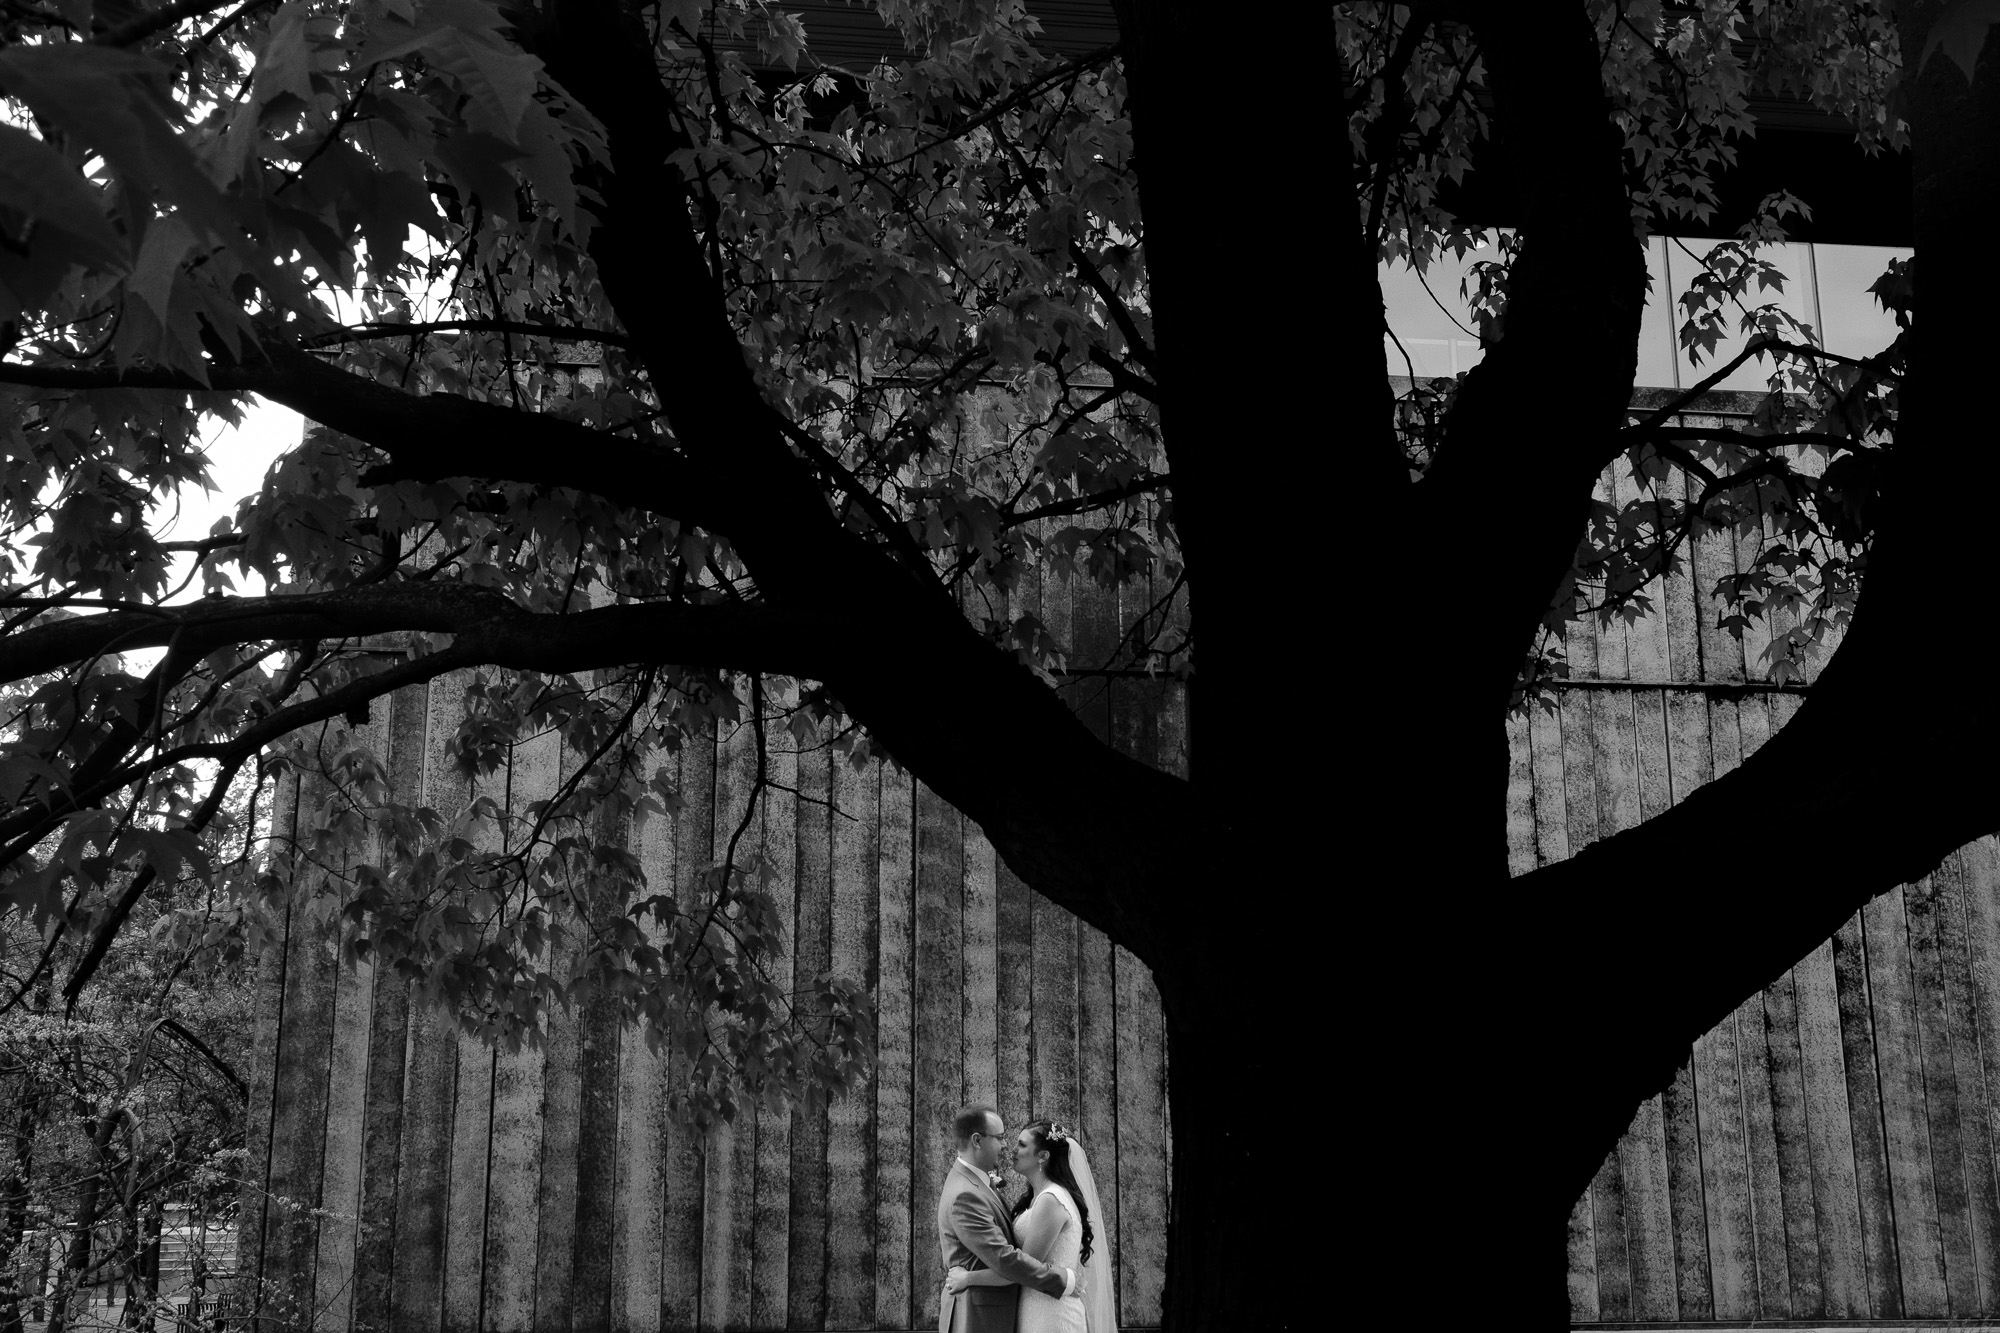  Cheri + Chris pose for a black and white wedding portrait on the grounds of University of Toronto Mississauga after their wedding ceremony at the Glenerin Inn. 